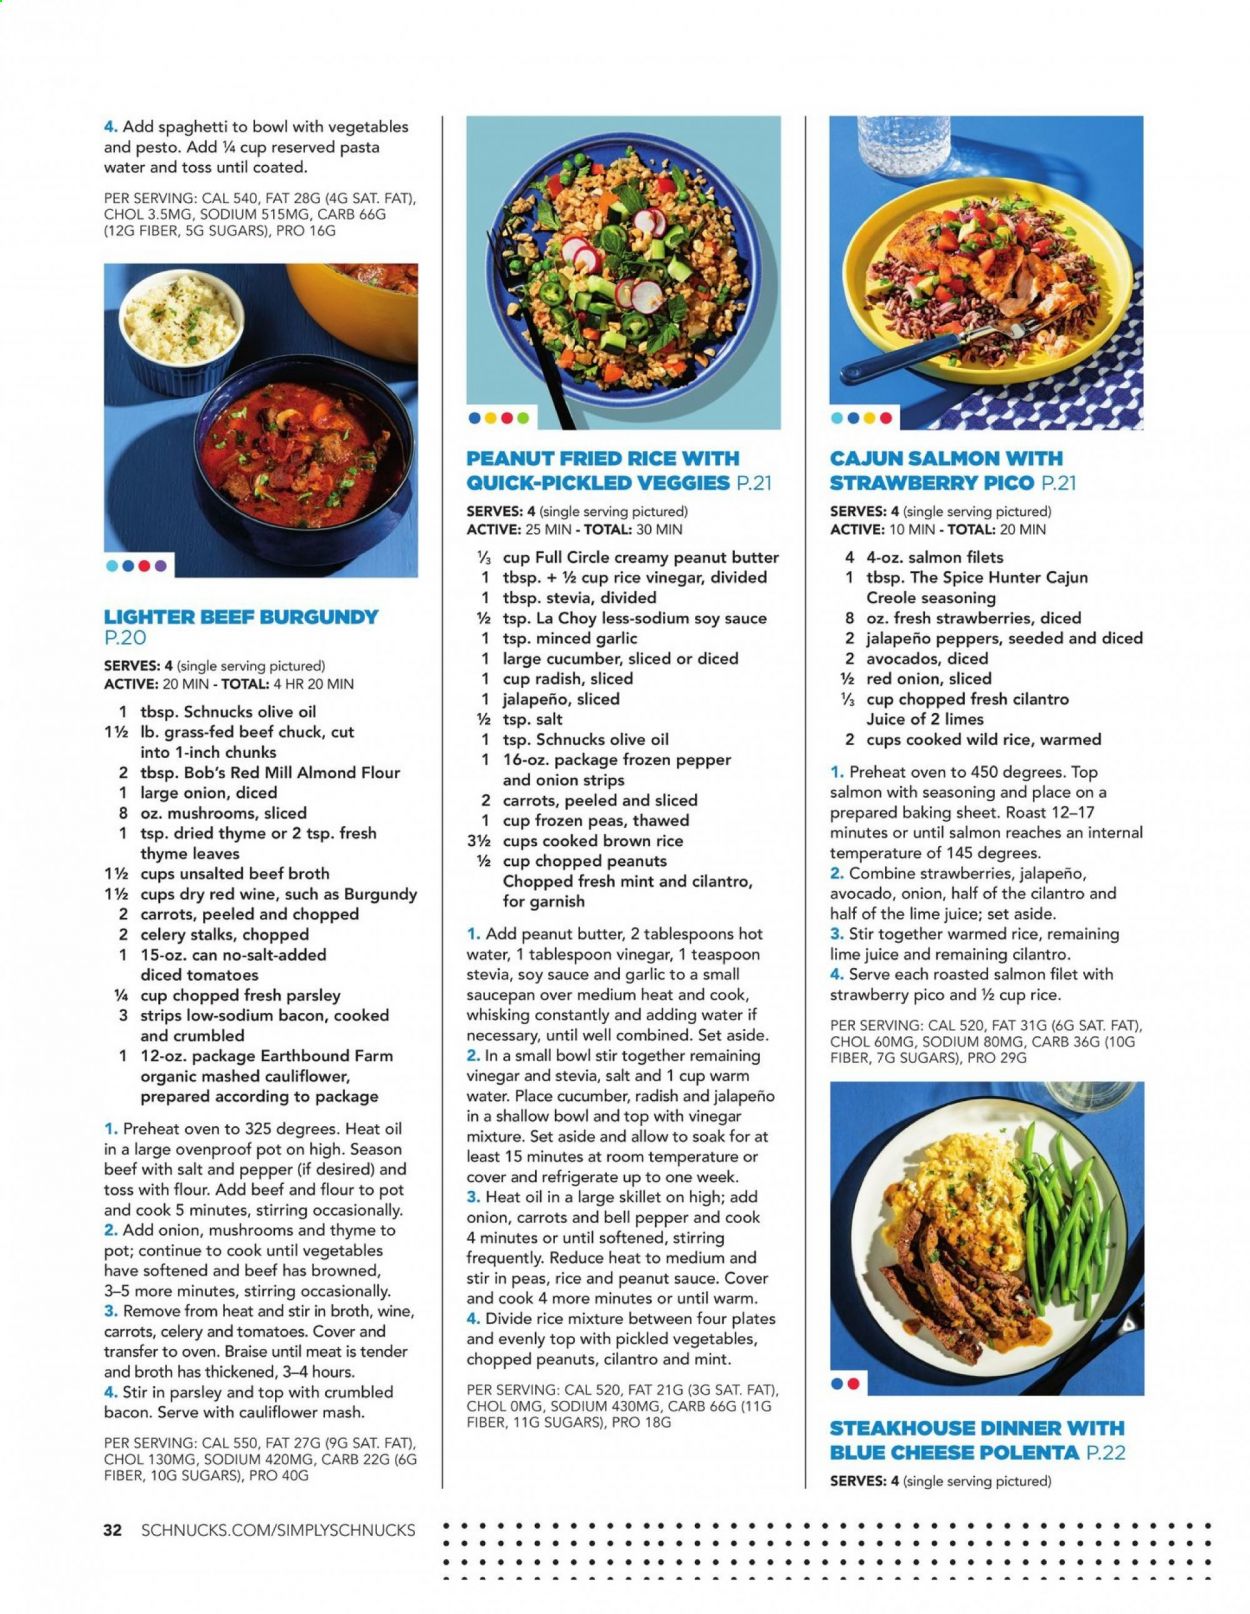 thumbnail - Schnucks Flyer - 01/01/2021 - 02/28/2021 - Sales products - mushrooms, bell peppers, celery, salmon, bacon, blue cheese, cheese, carrots, cauliflower, strawberries, peas, strips, beef broth, broth, almond flour, stevia, cucumber, jalapeño, polenta, brown rice, spaghetti, pasta, cilantro, parsley, pepper, soy sauce, pesto, rice vinegar, vinegar, olive oil, peanut butter. Page 34.